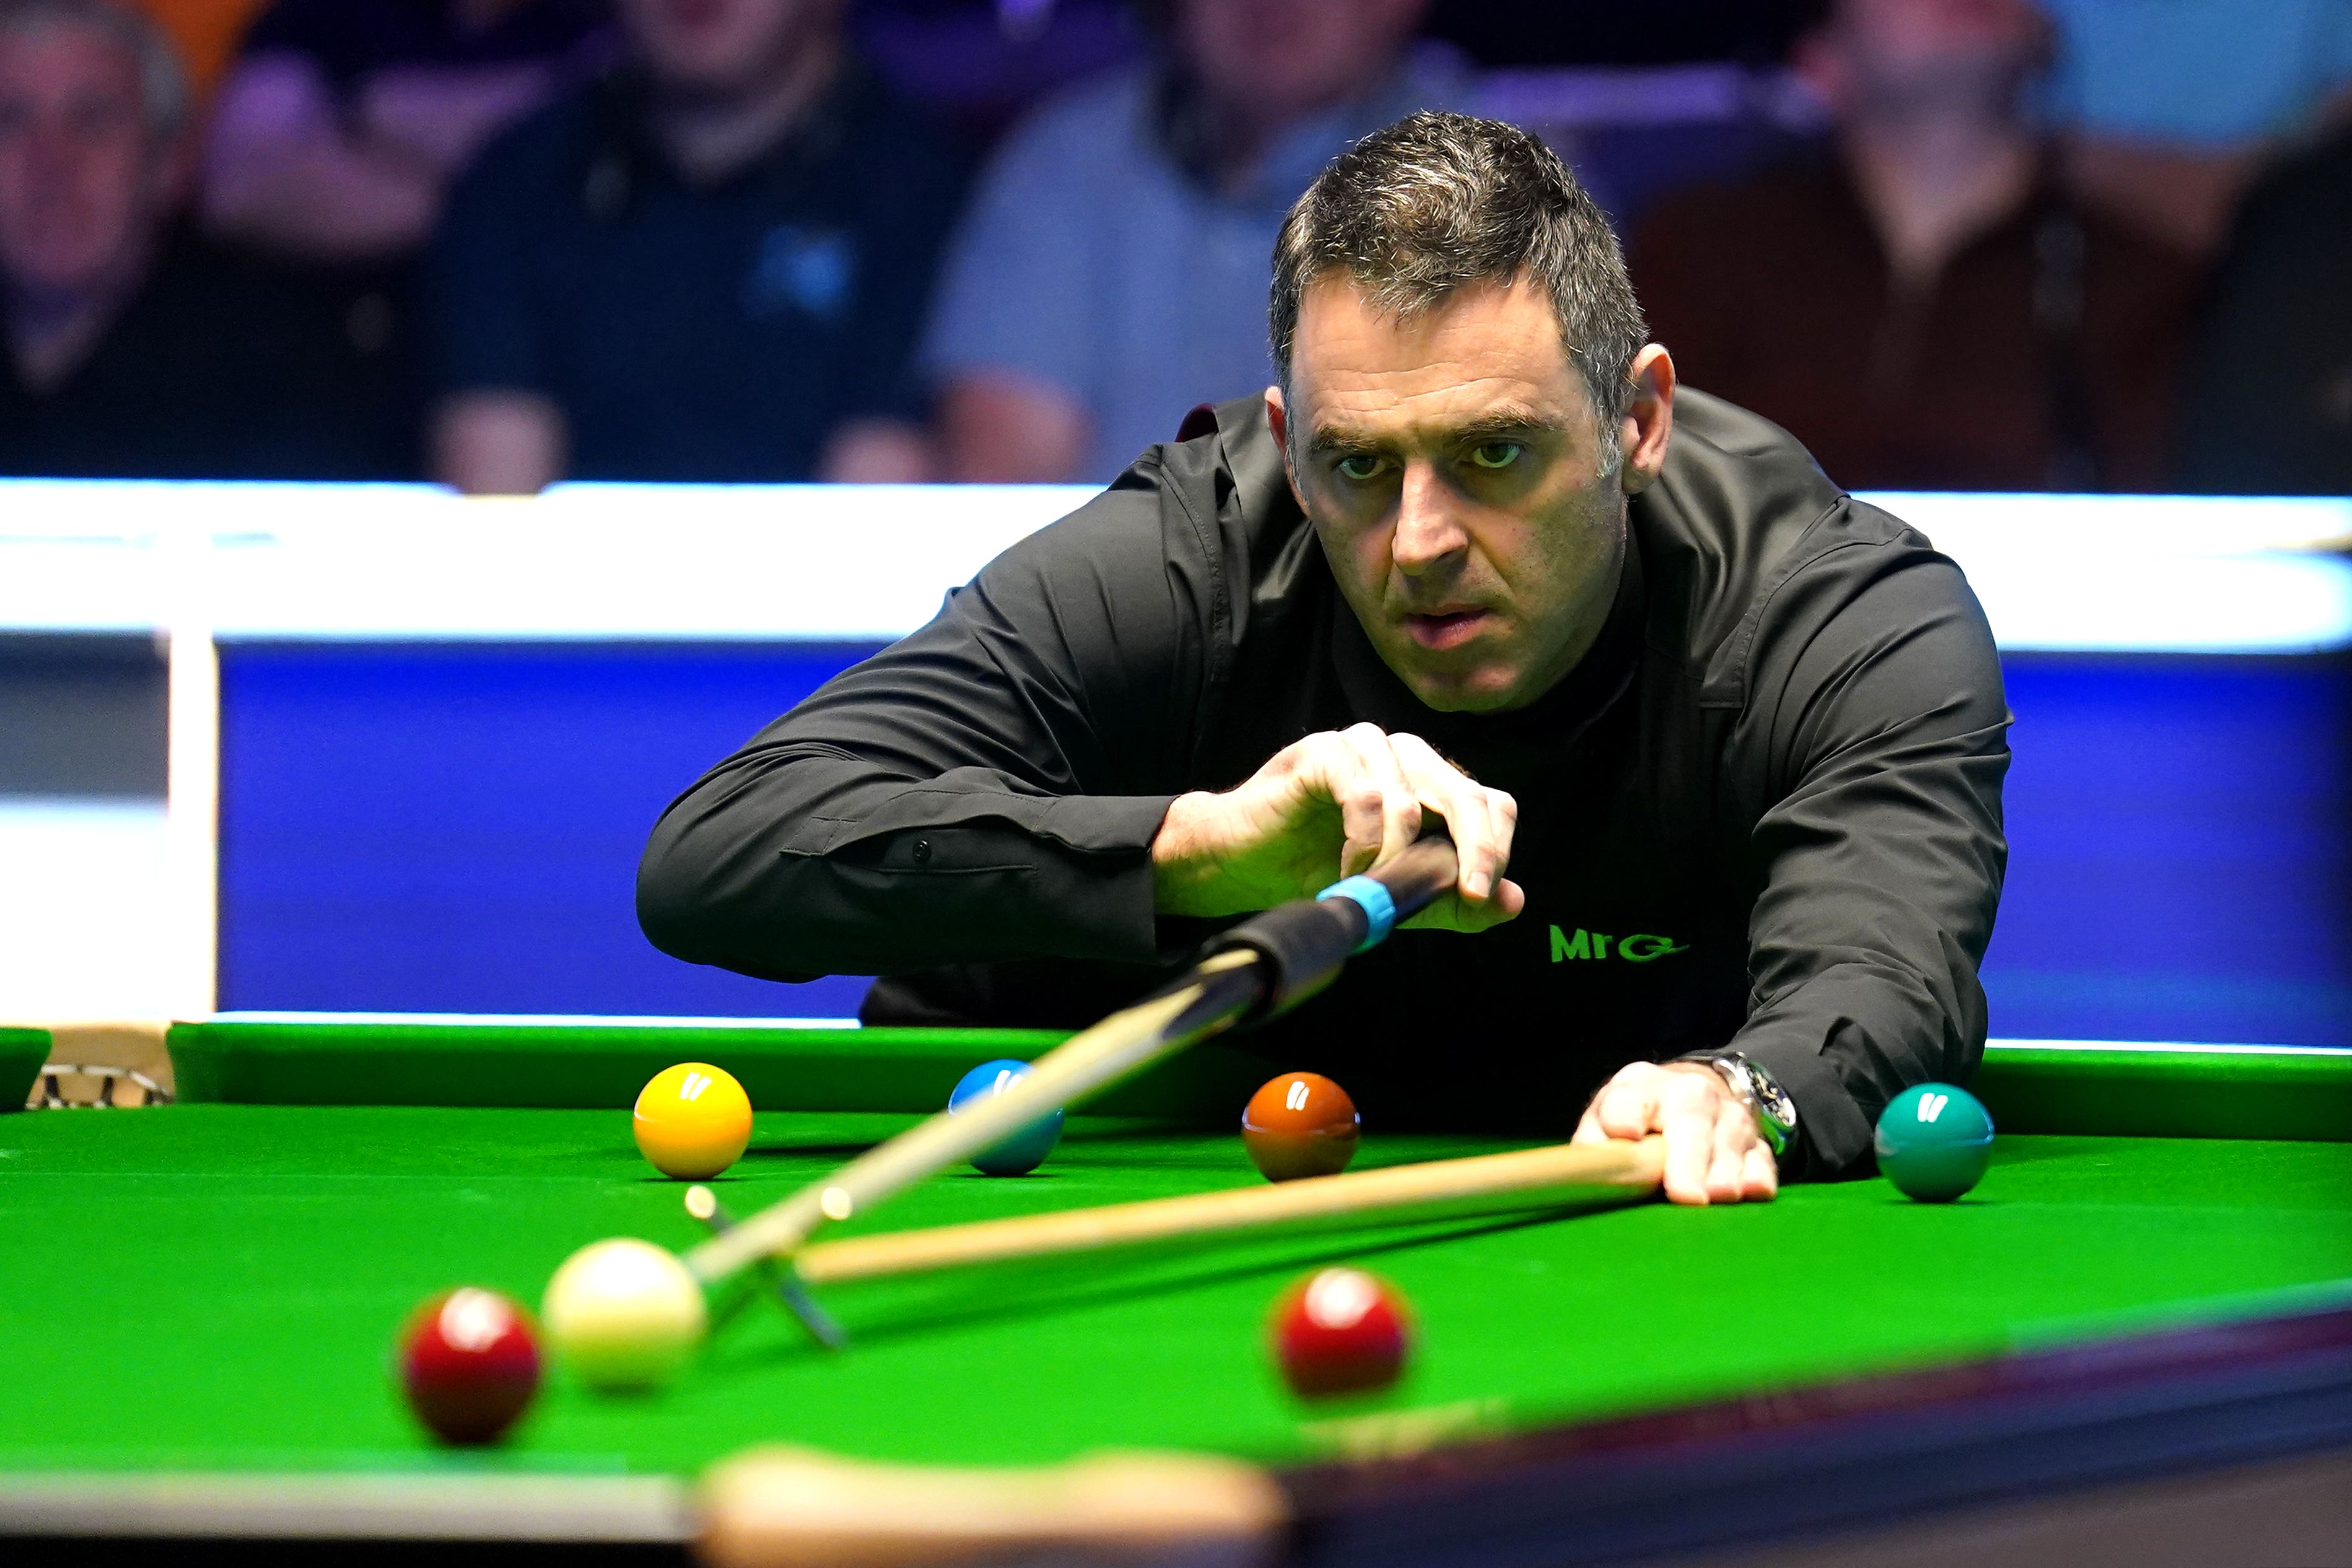 Ronnie O’Sullivan is the most successful player in snooker history